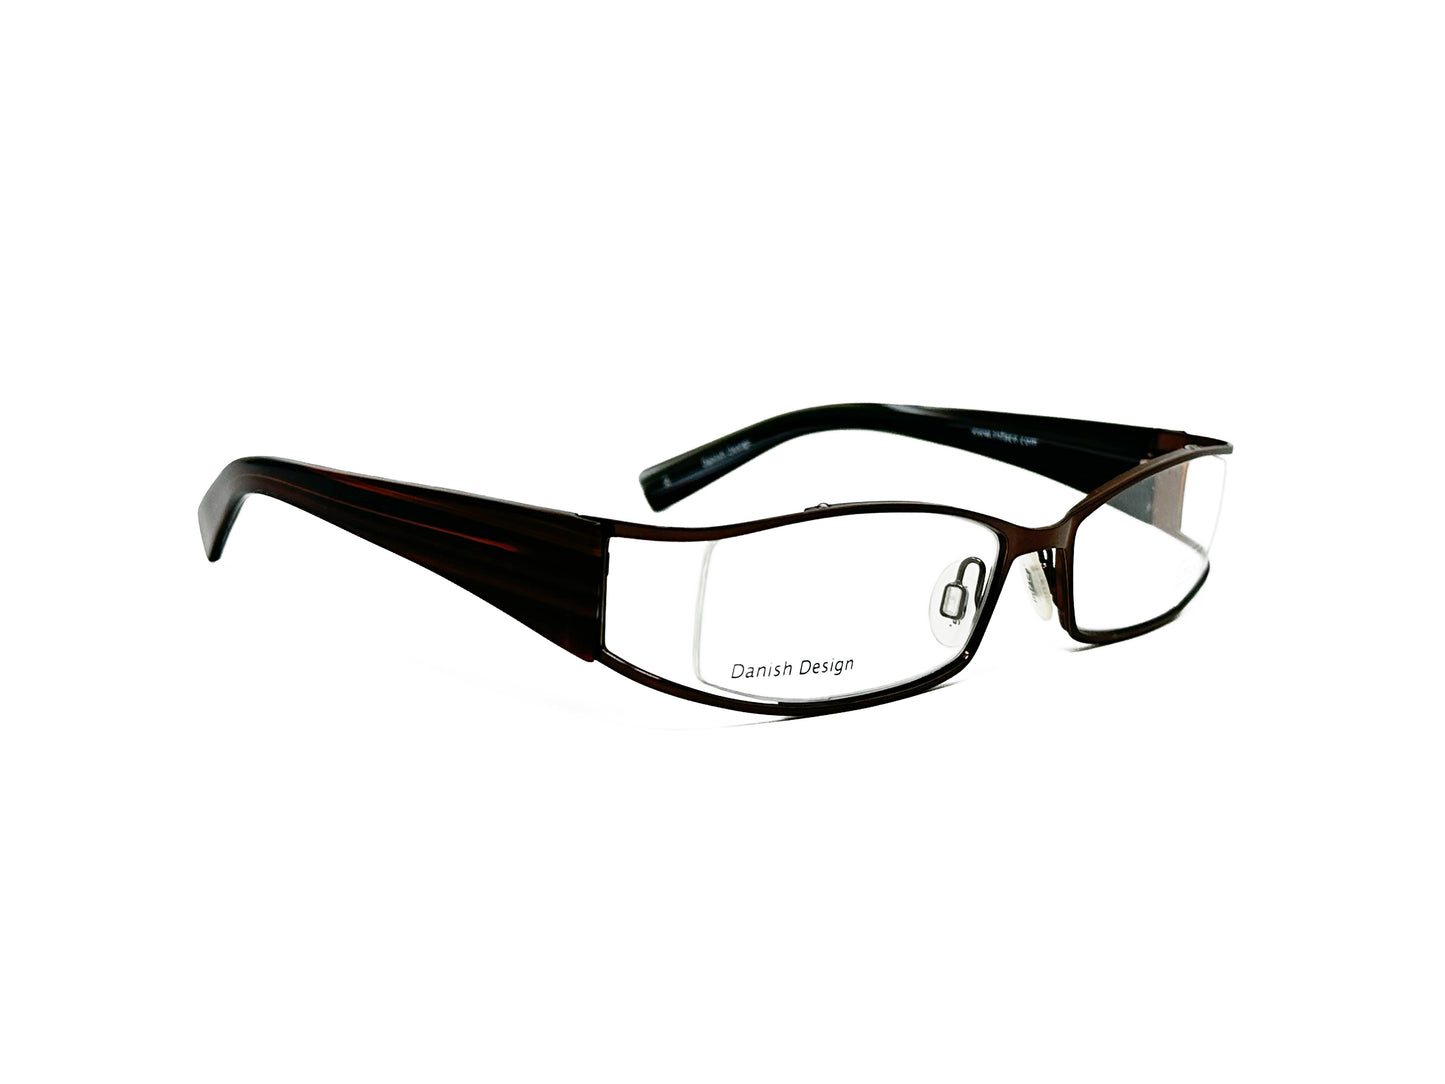 inface rectangular, metal optical frame with curved top and gap between side of lens and frame. Model: if8209. Color: 674 - Dark Brown. Side view.